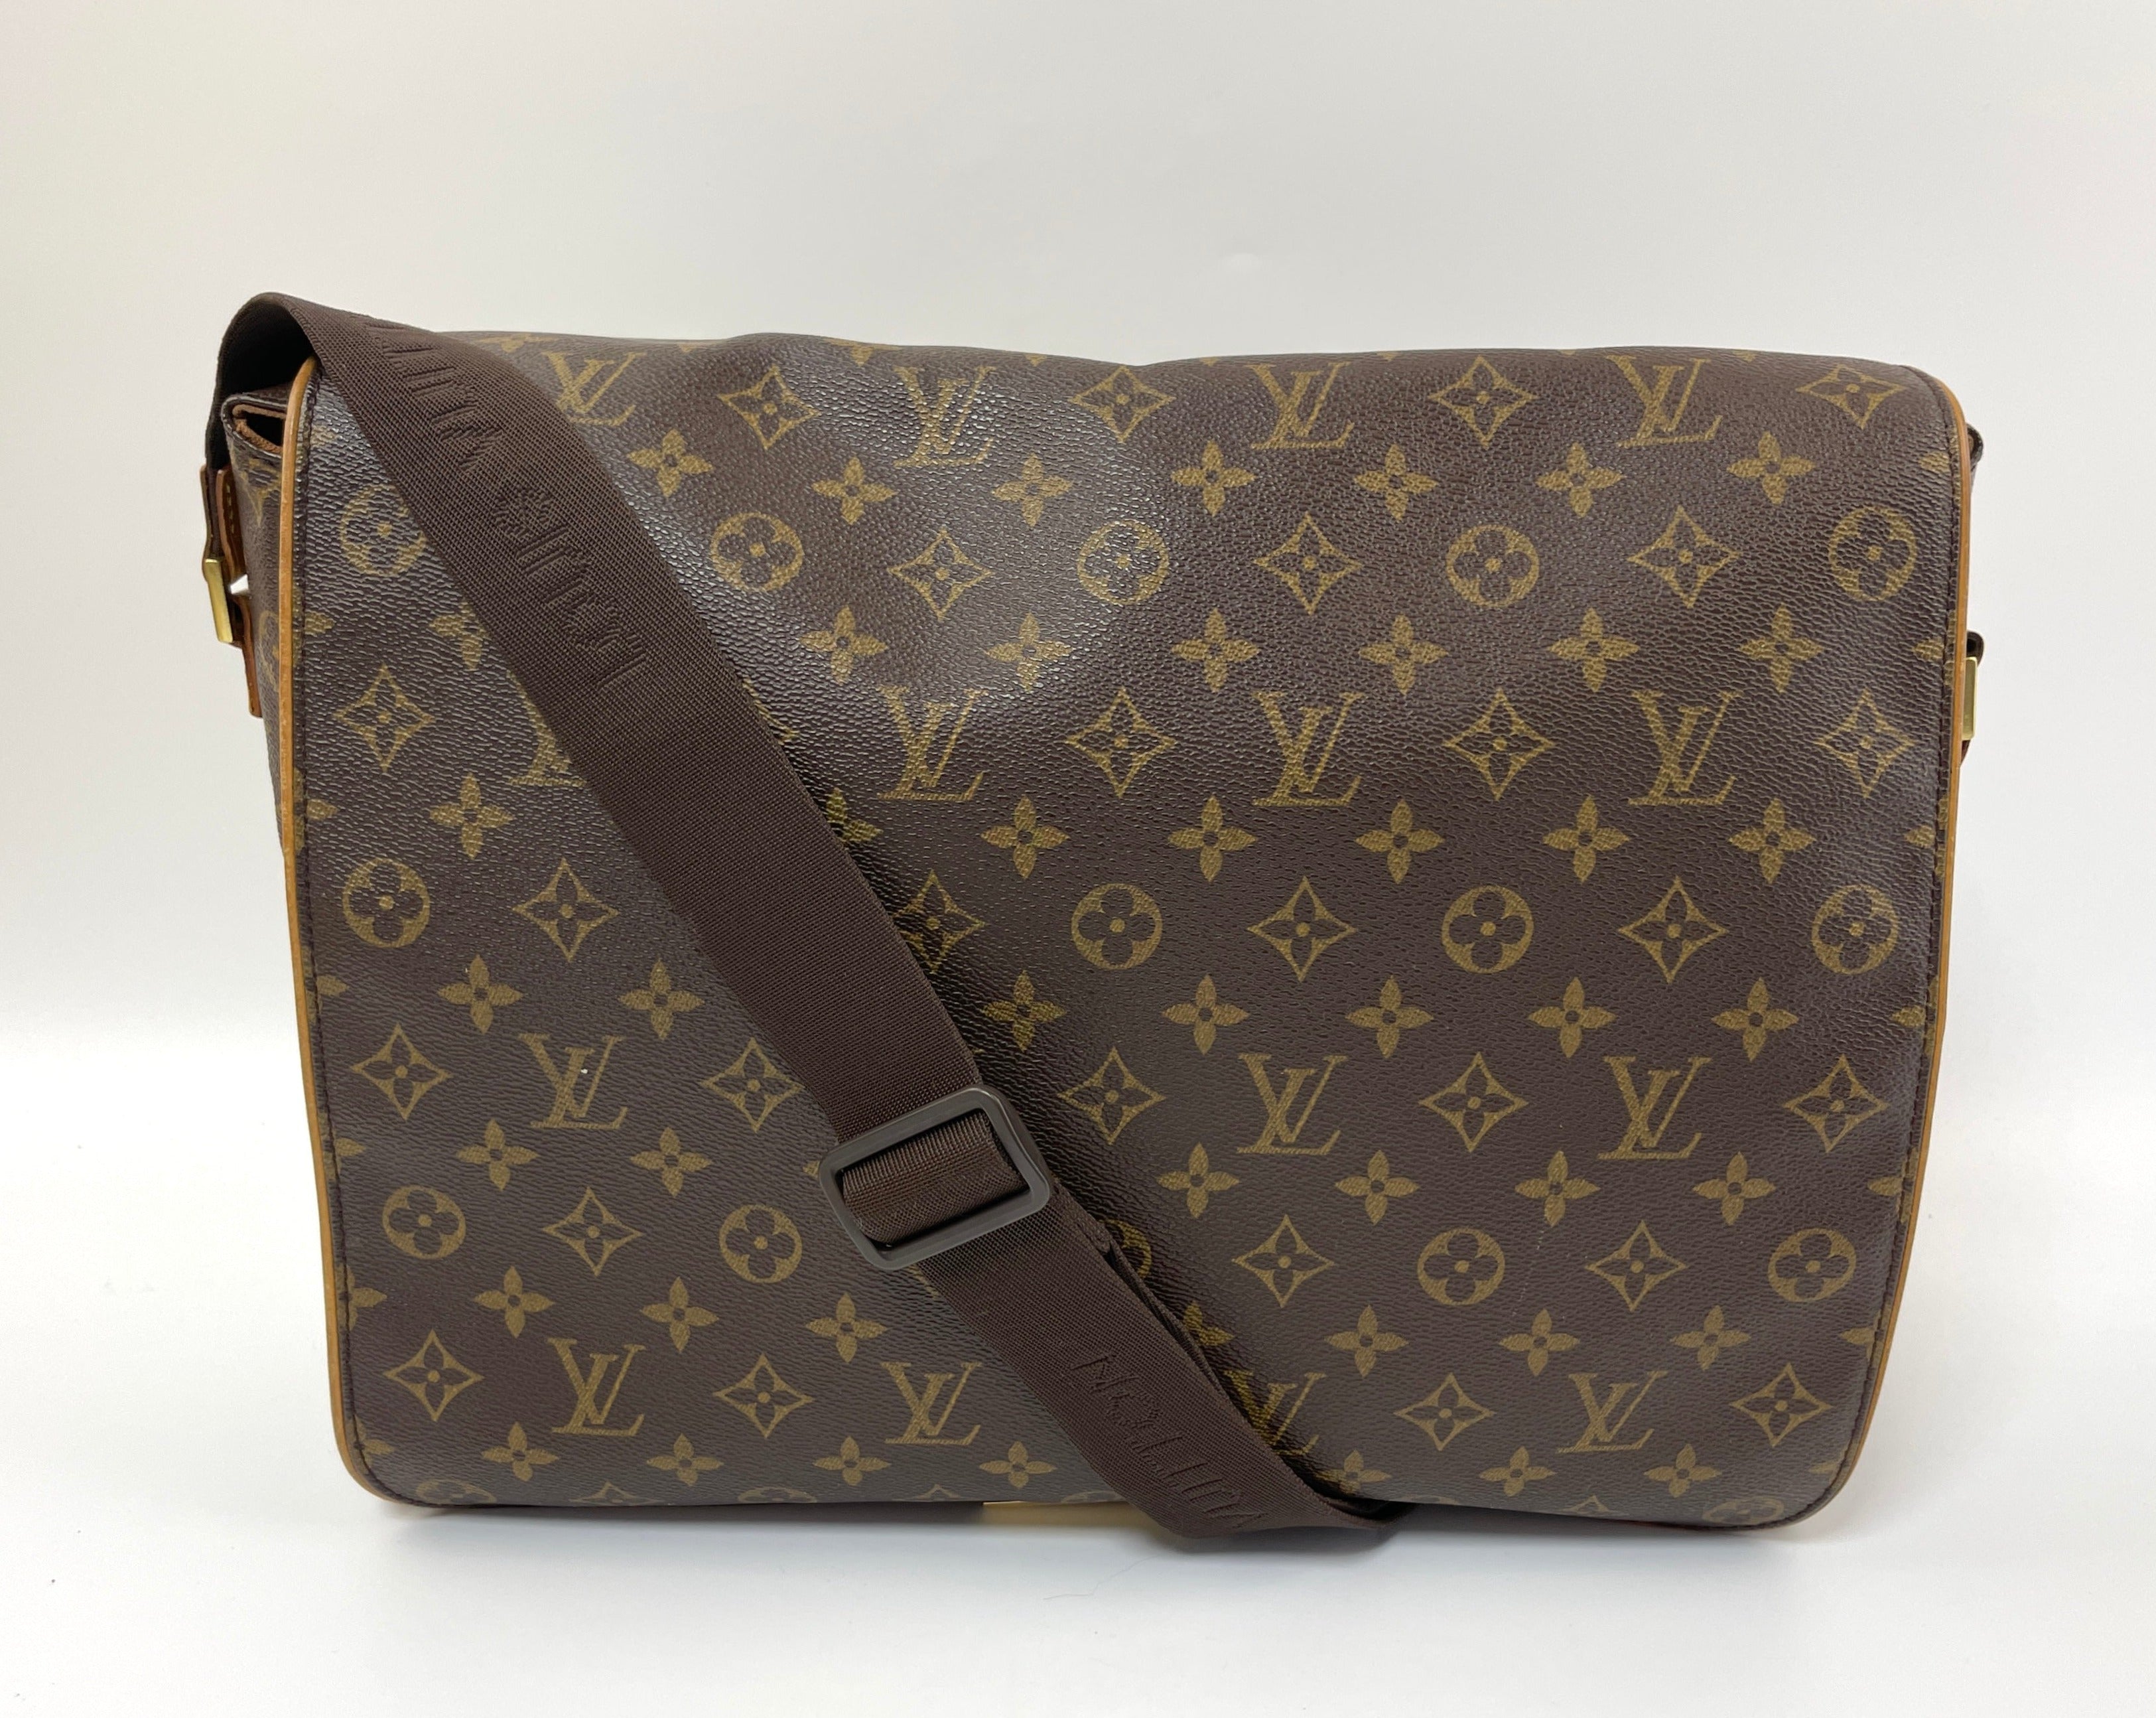 used vuitton bags